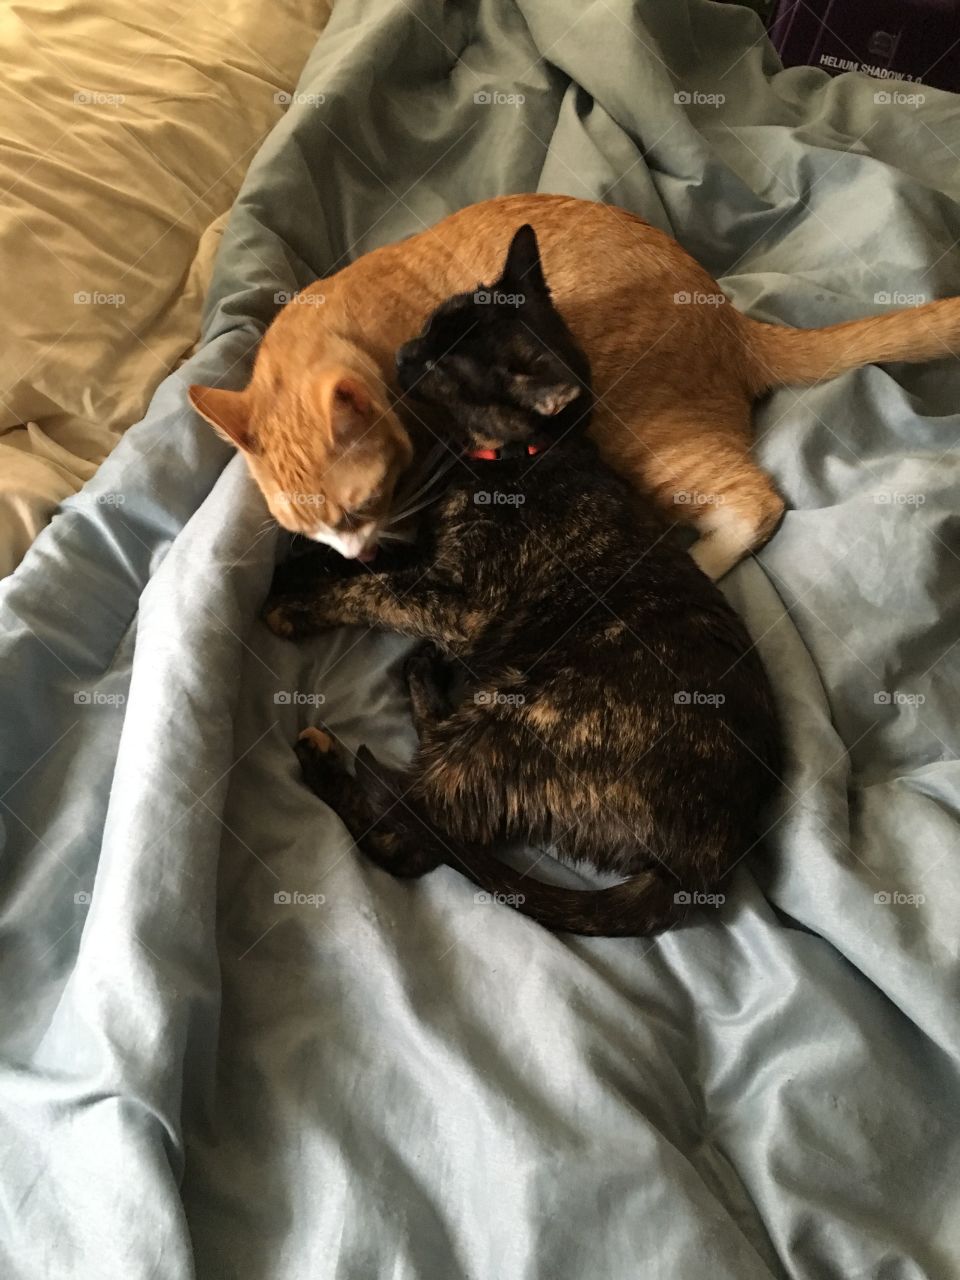 Our two little ones love cuddling and grooming each other!